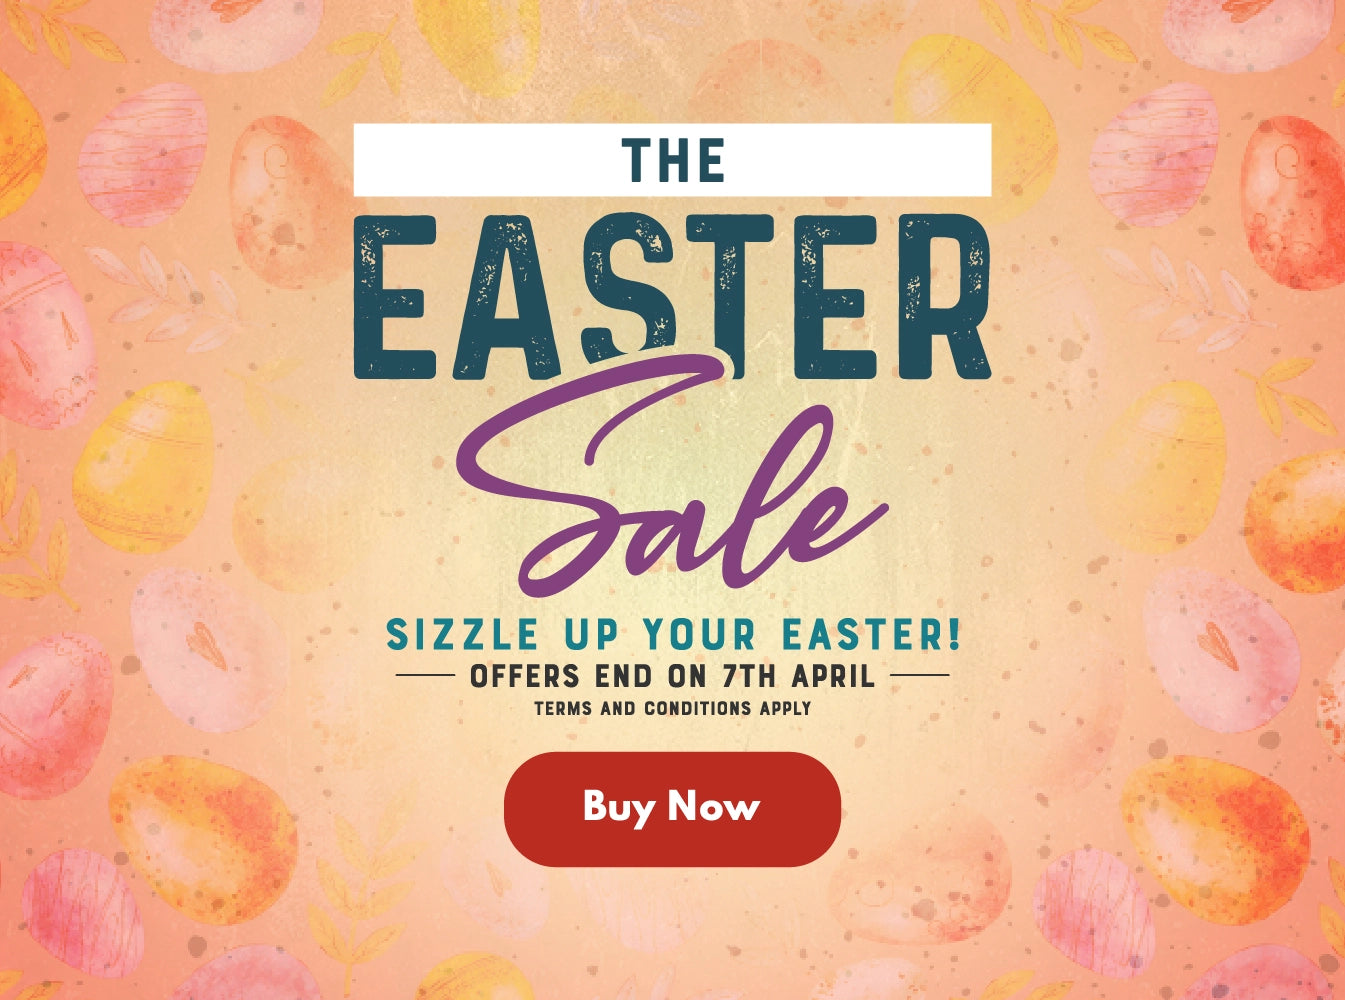 Easter Sale, Sale, Discounts, Offers, BBQ